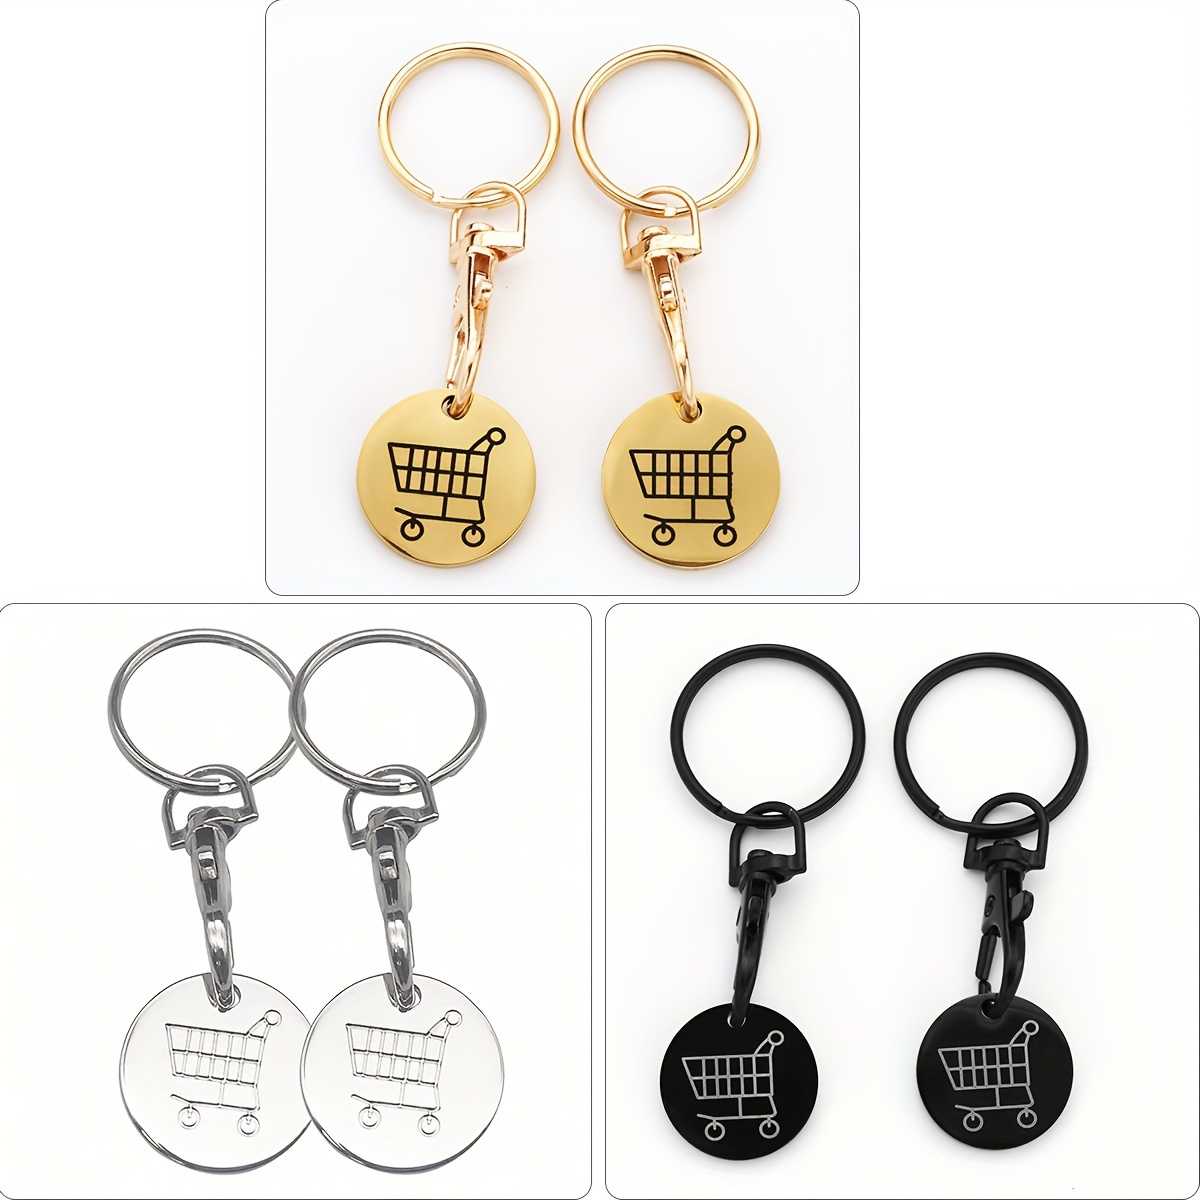 

2pcs Shopping Trolley Tokens Keychain Stainless Steel Shopping Cart Keychain Grocery Store Backpack Key Chain